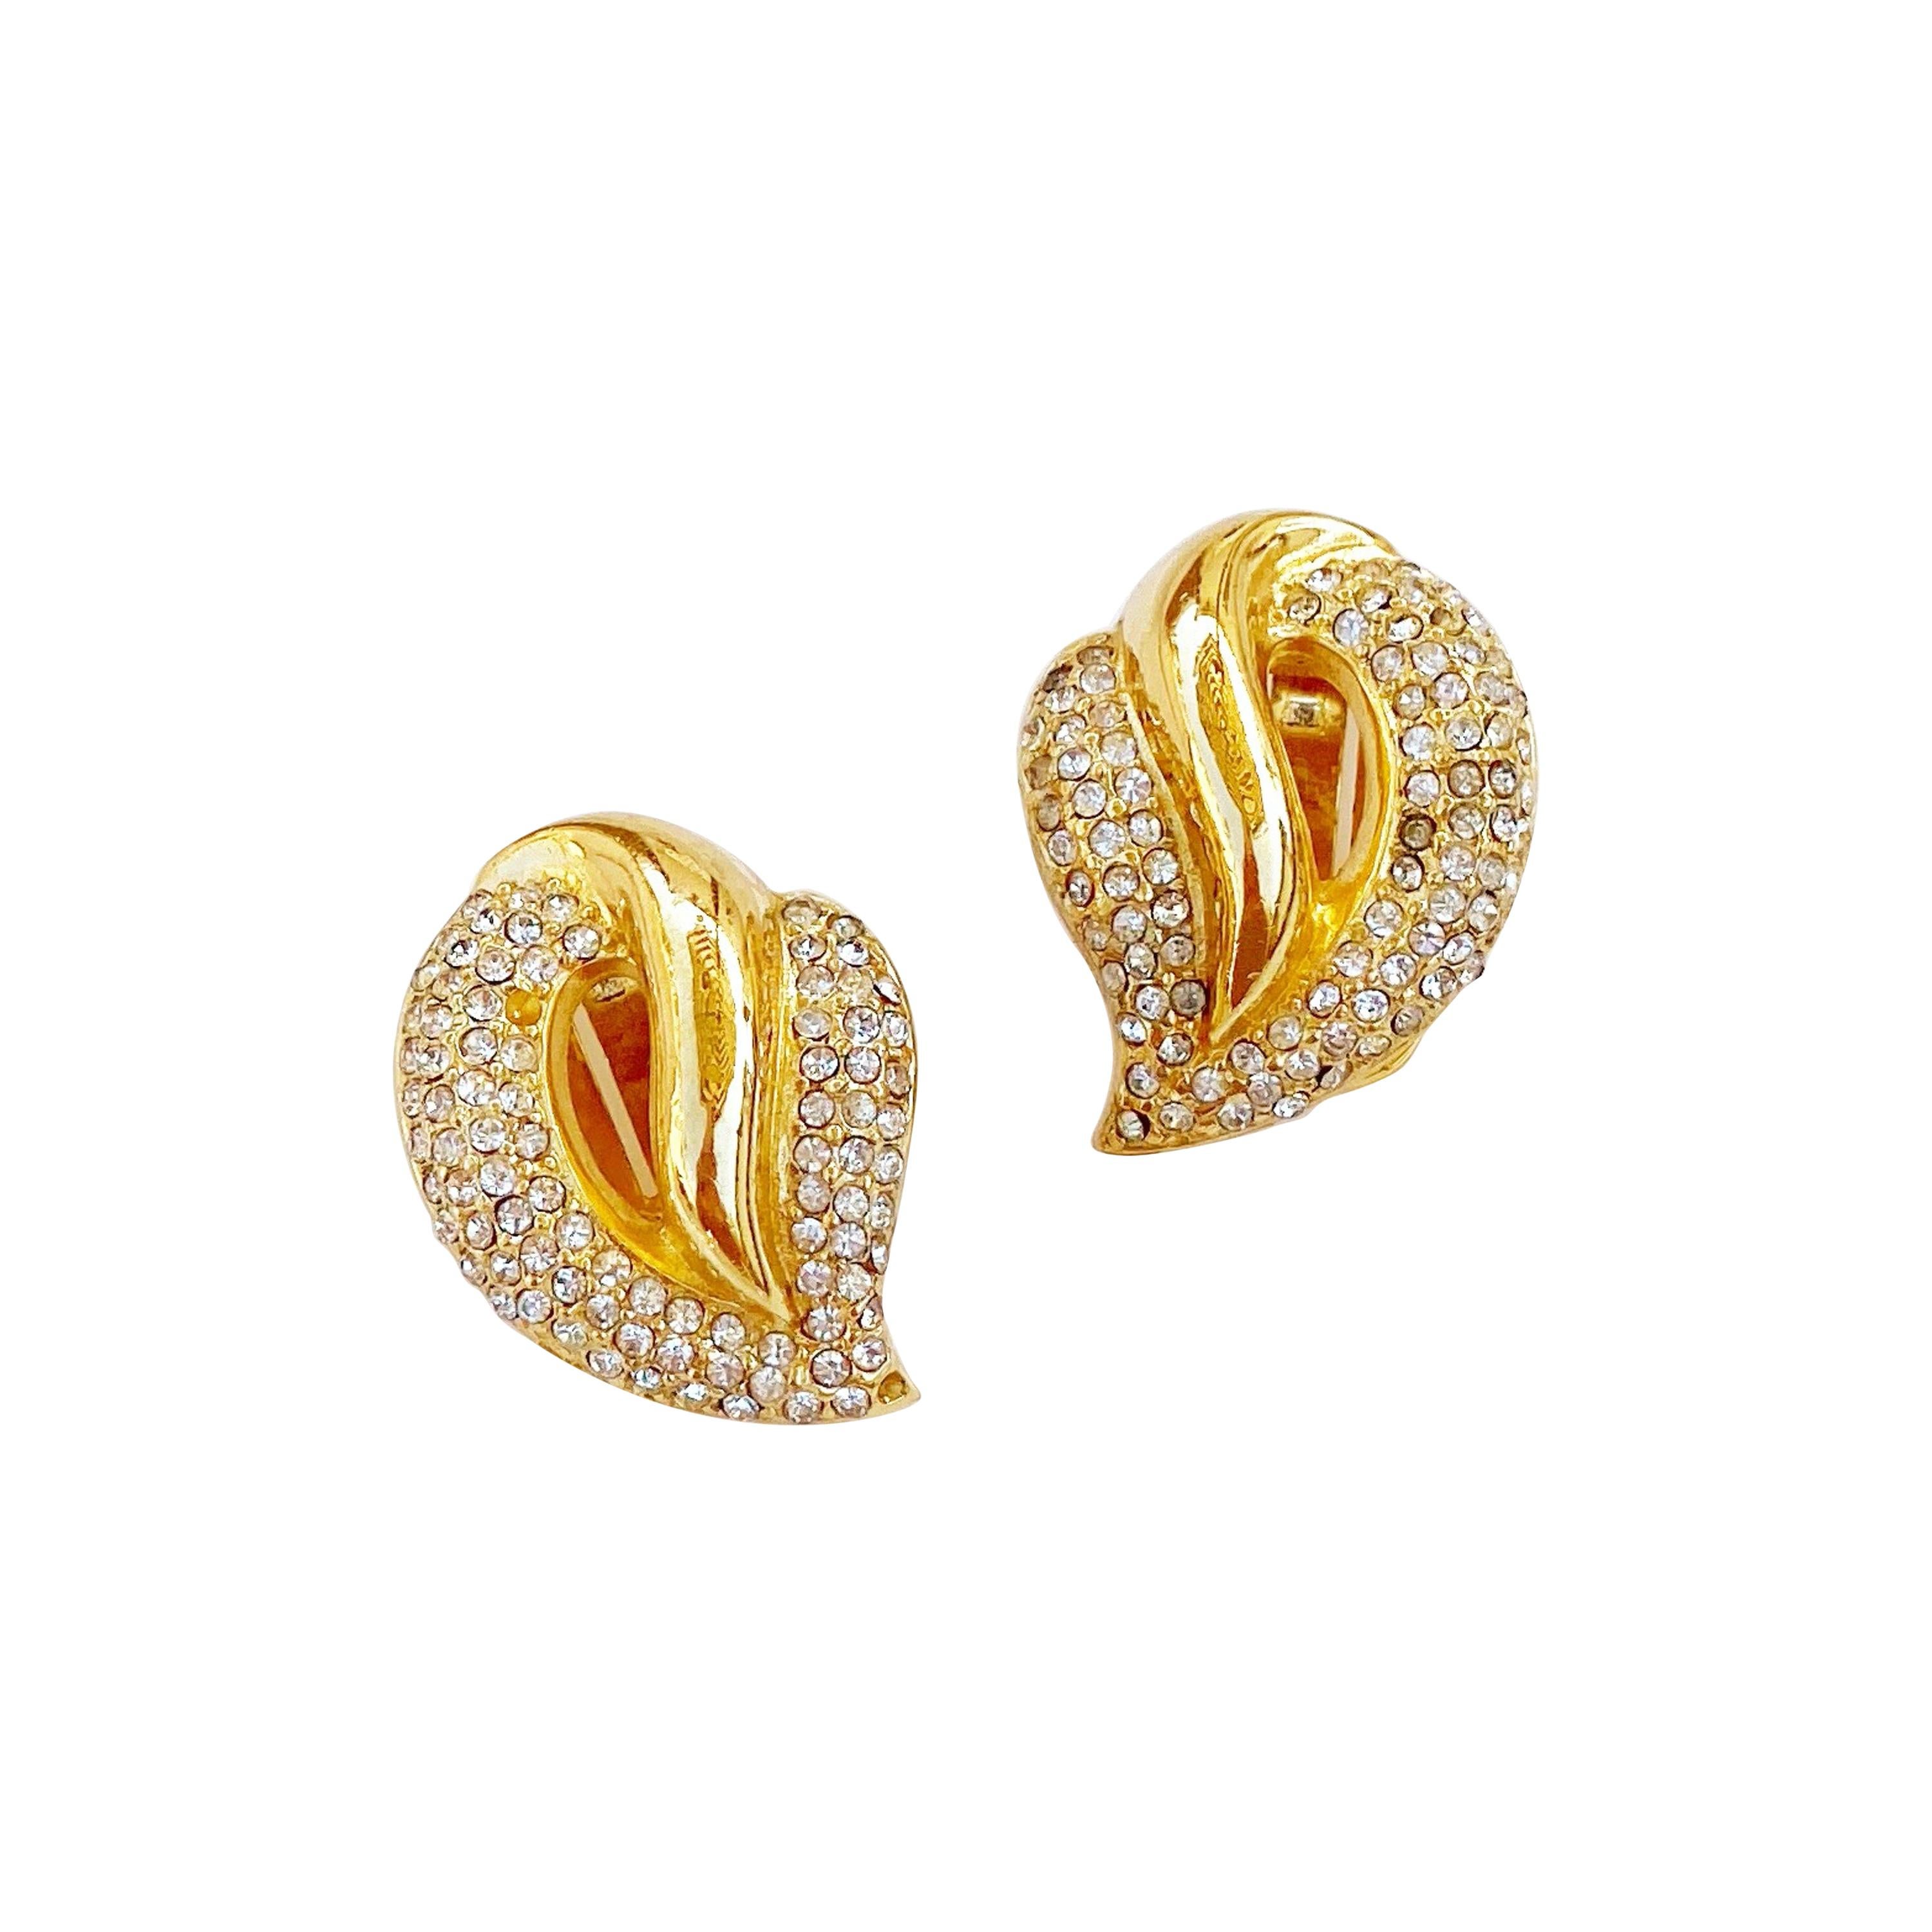 1980s Gilt Abstract Leaf Earrings With Crystal Rhinestone Pavé By Christian Dior For Sale